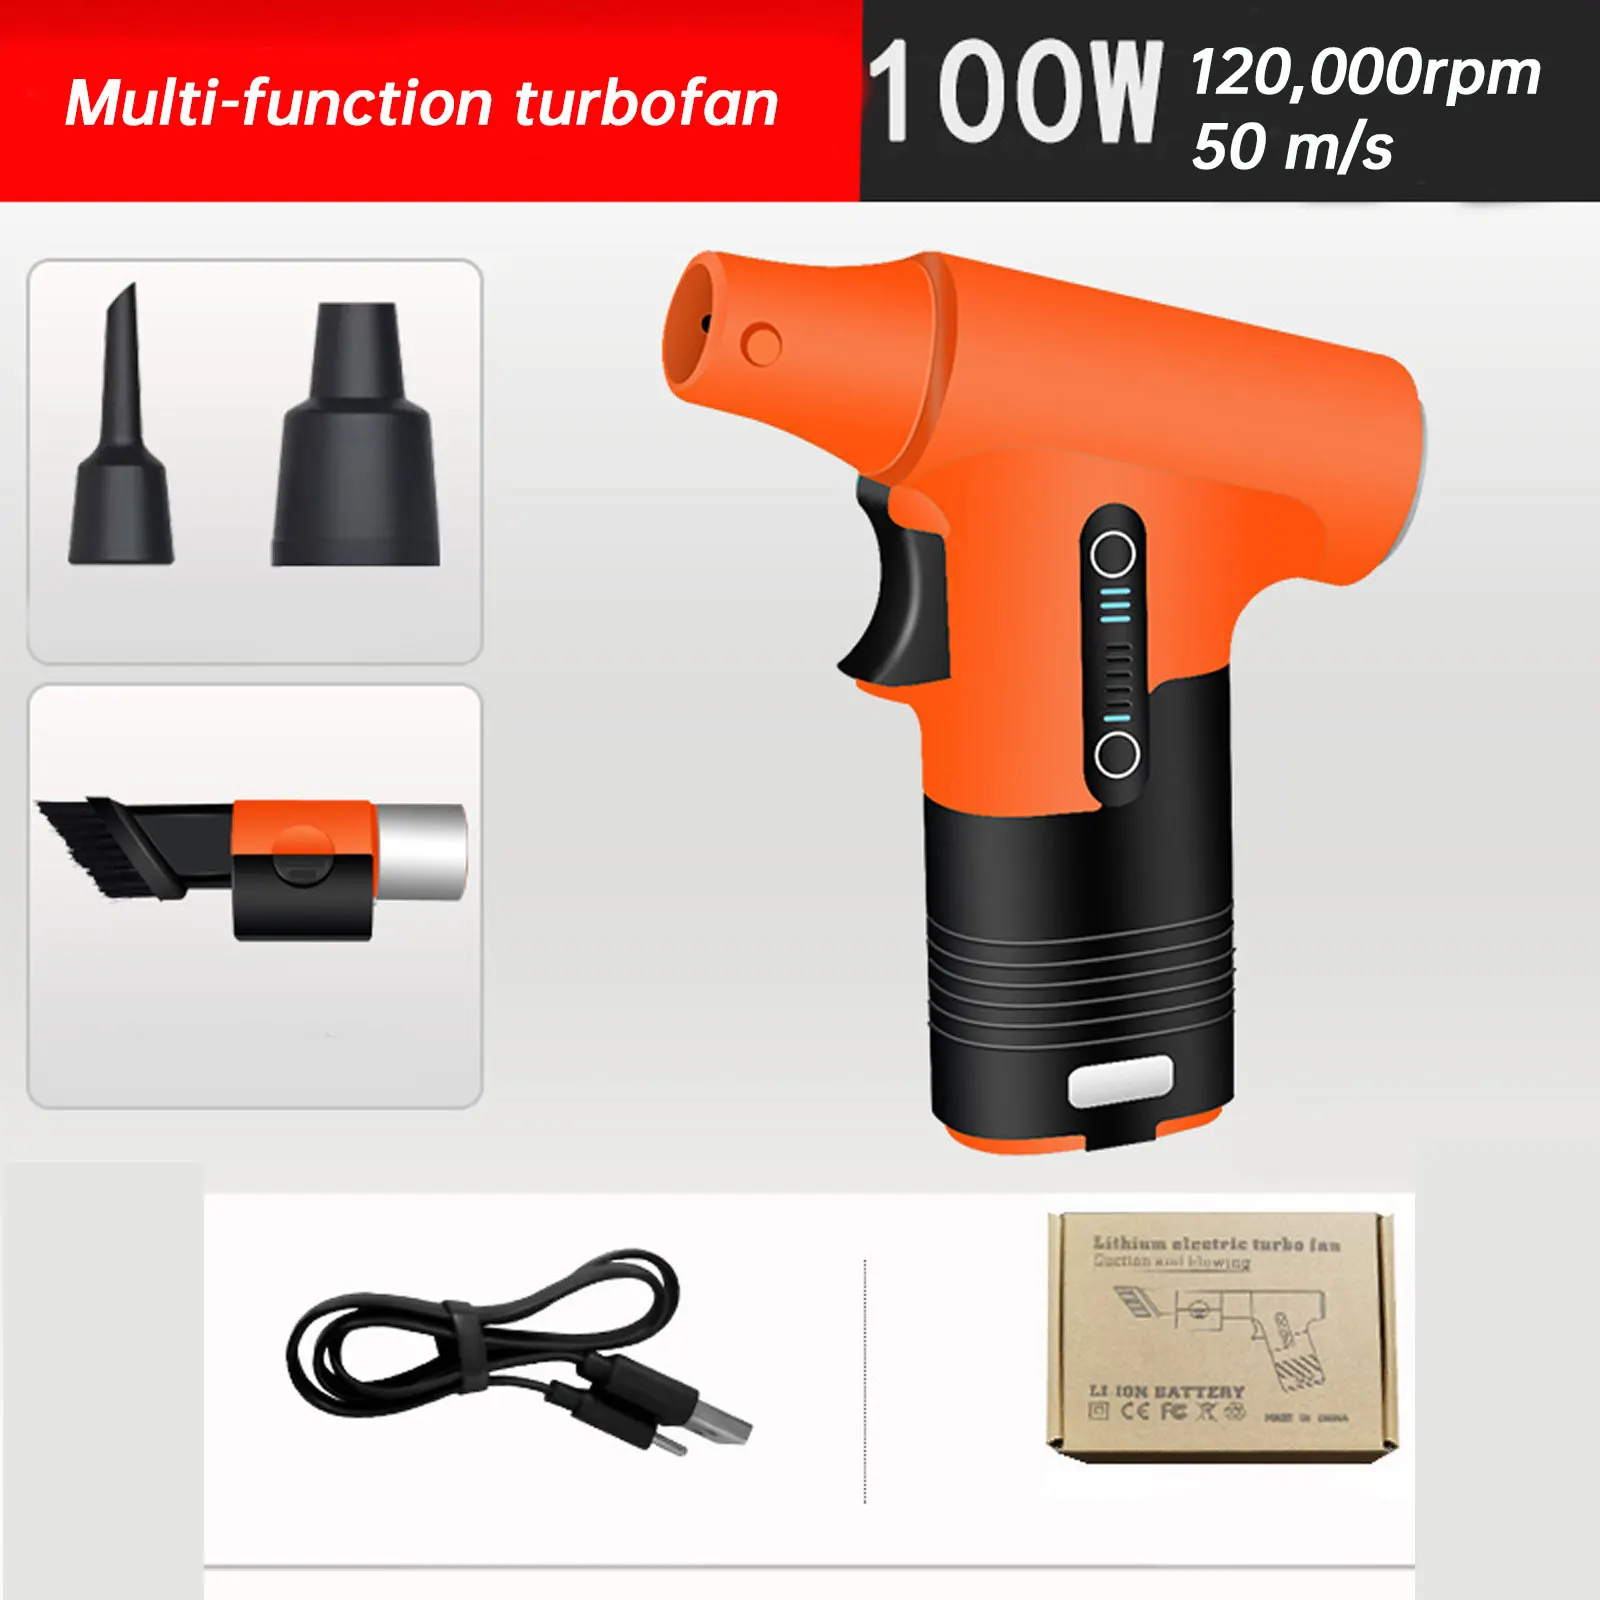 Brushless Motor Jet Fan 120,000RPM Turbofan High Power Dust Blower Compressed Air Duster Keyboard Cleaning Tool Type-C Interface futuknight multi functional double head slit brush car air conditioning outlet keyboard blinds cleaning dust scurbber fut051